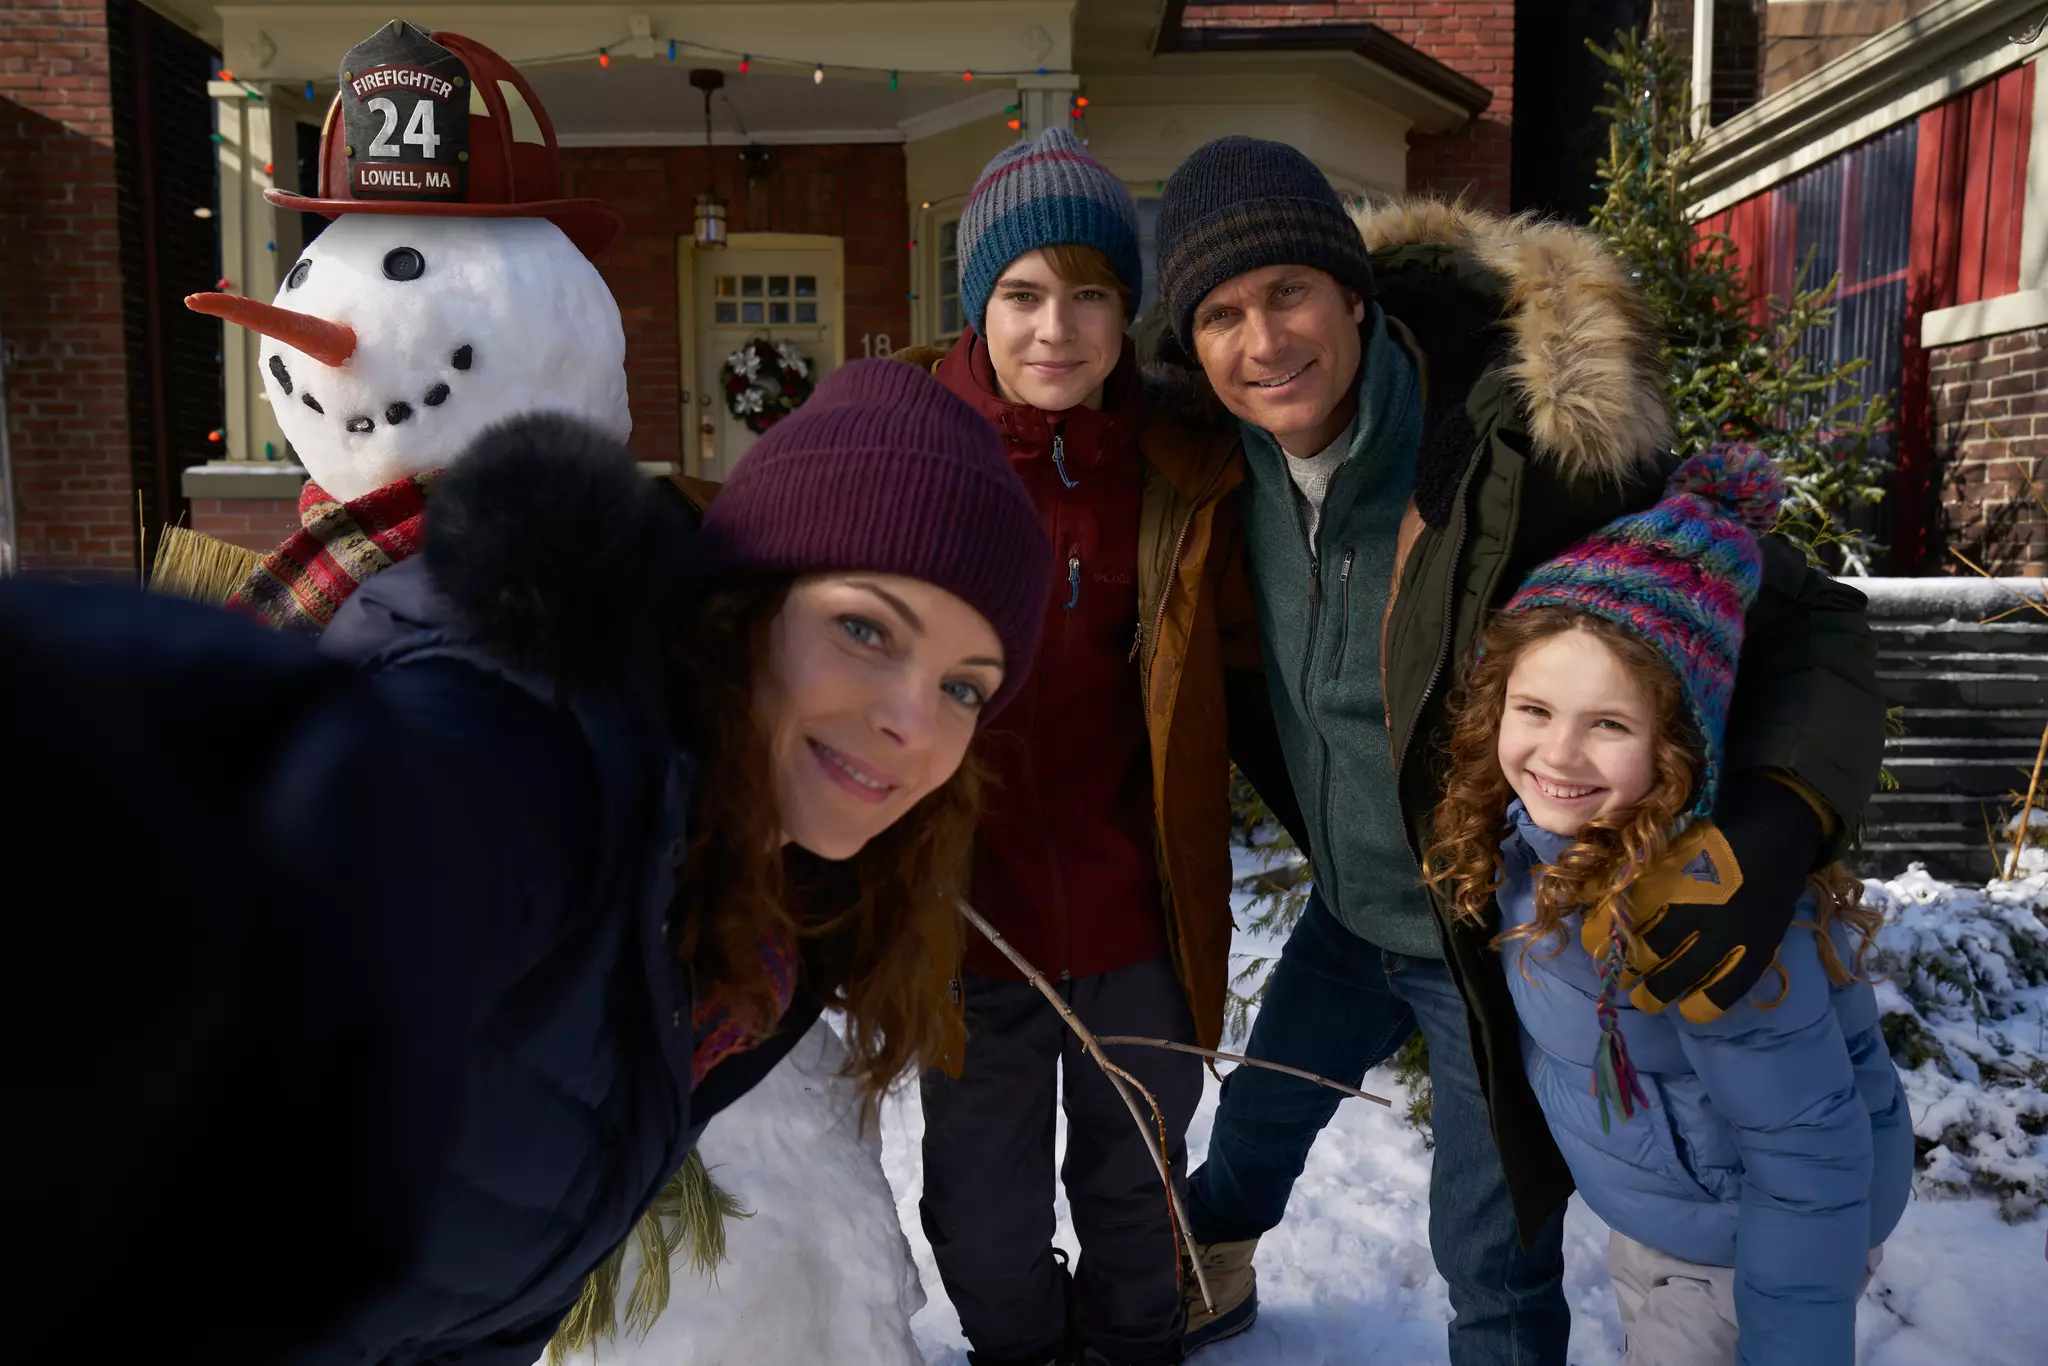 'The Christmas Chronicles 2' will revisit Kate, pictured far right, who is now a disillusioned teenager (